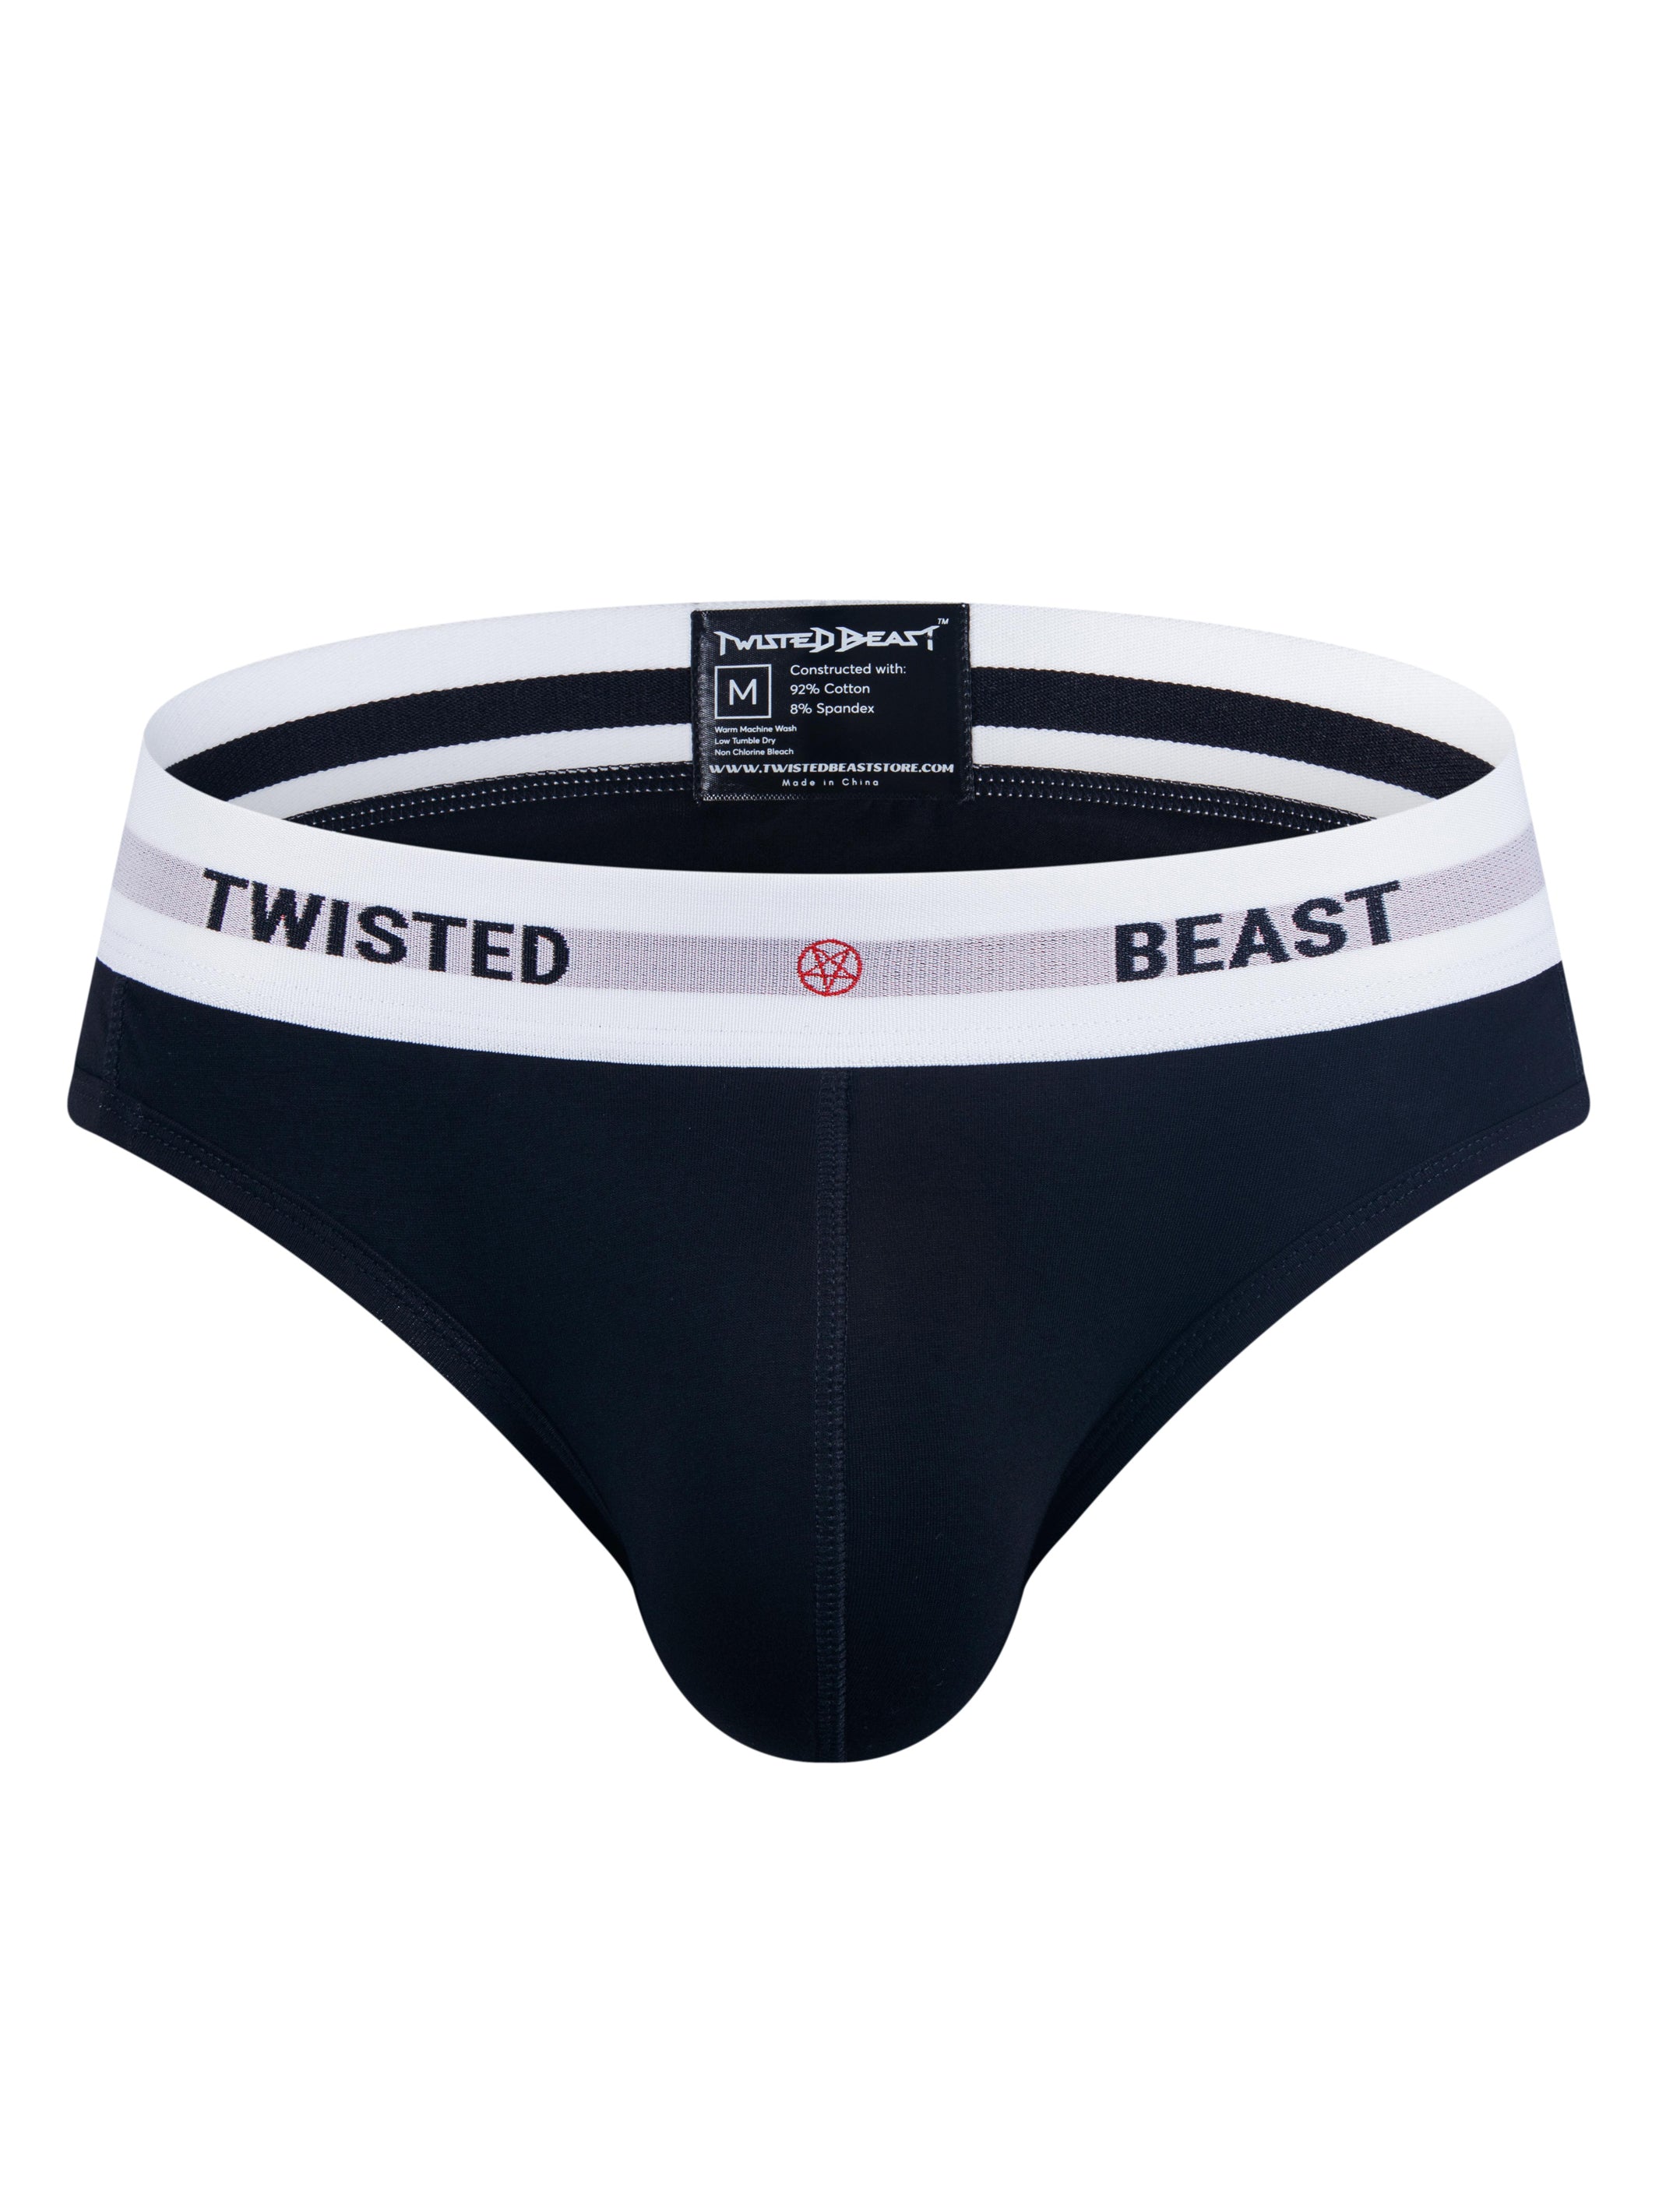 A front shot showing the words Twisted Beast and a pentagram on a pair of black Insignia Brief's.